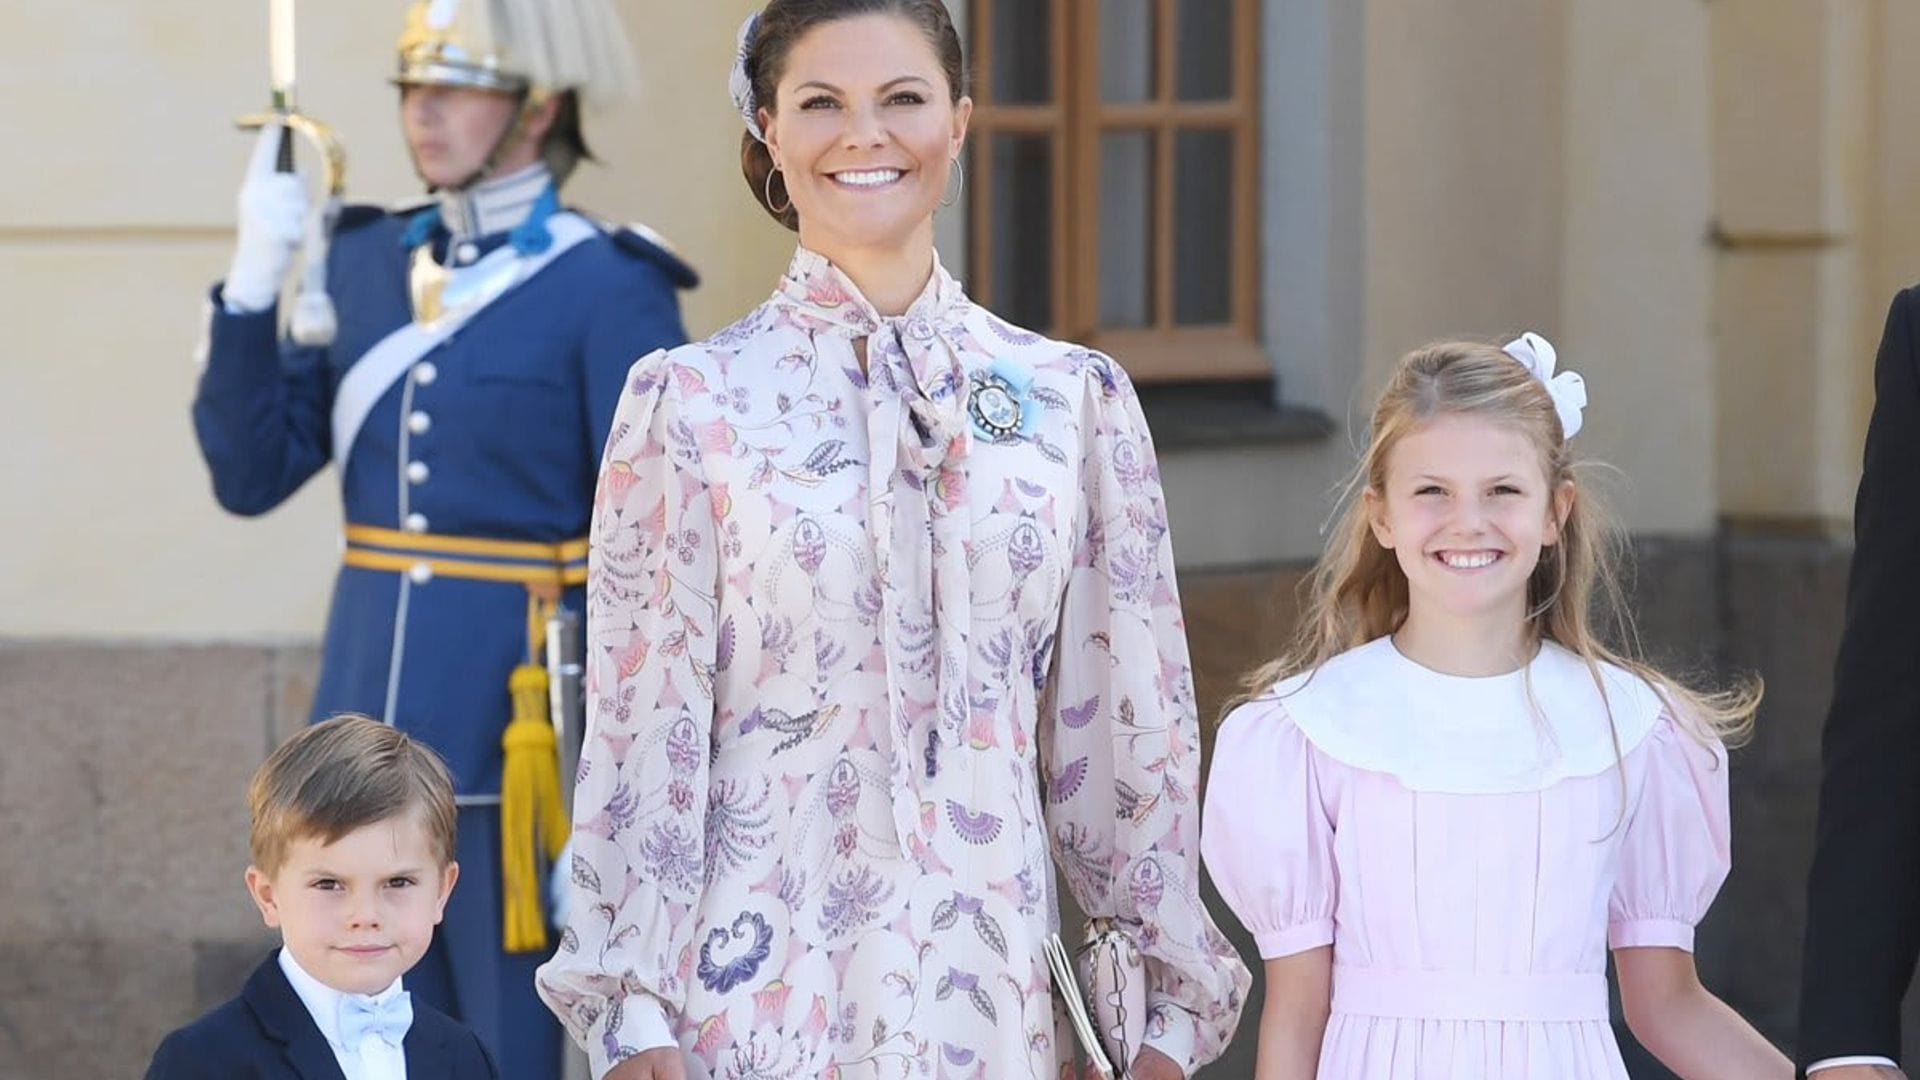 Princess Estelle shows off Swedish pride in new photo with mom and brother Prince Oscar